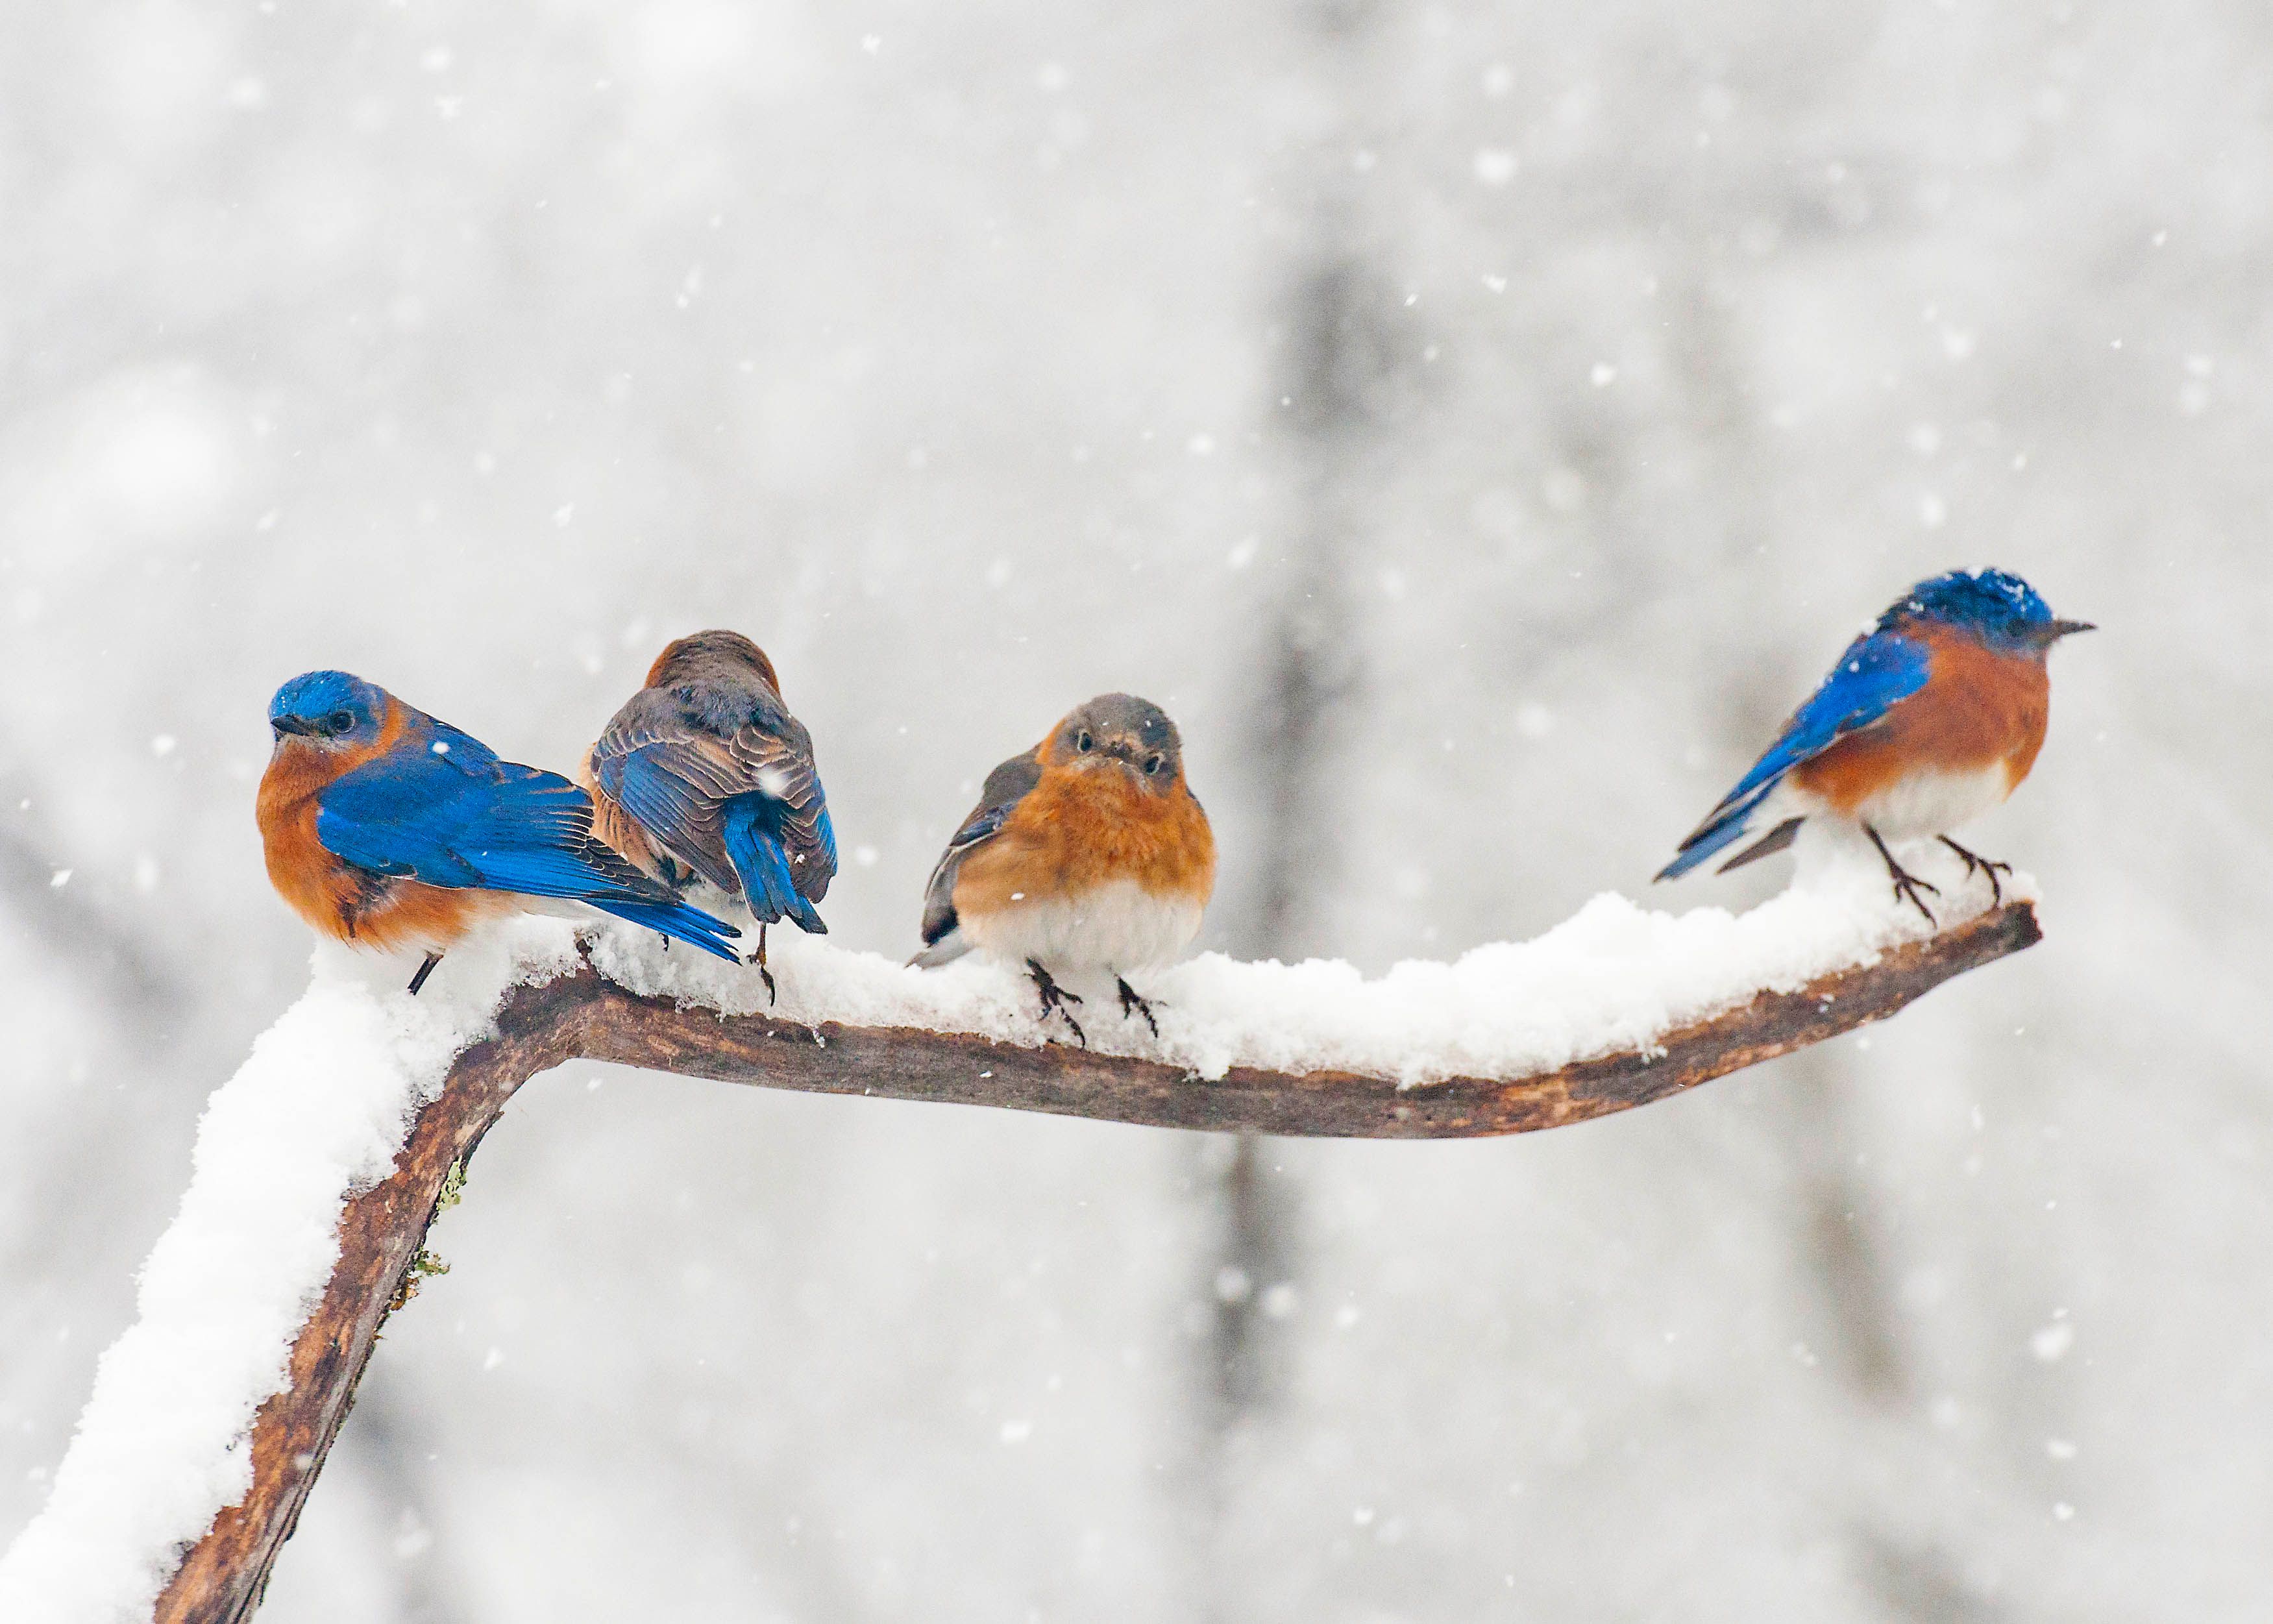 Tips on How to Attract Birds in the Winter